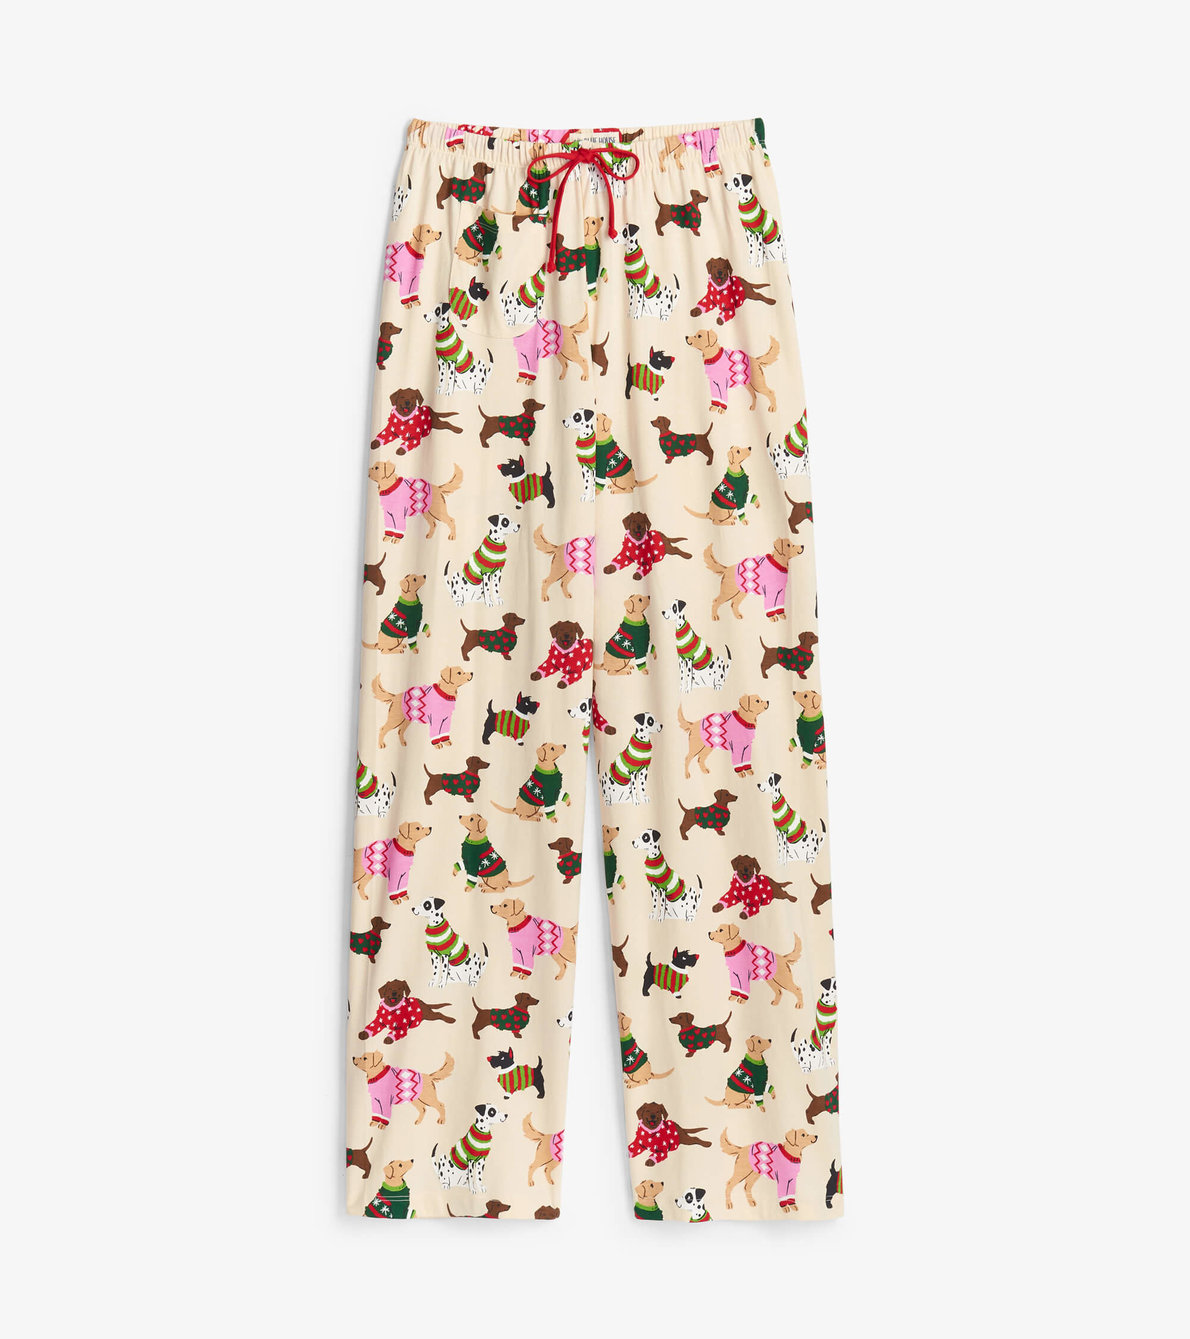 View larger image of Women's Woofing Christmas Jersey Pajama Pants